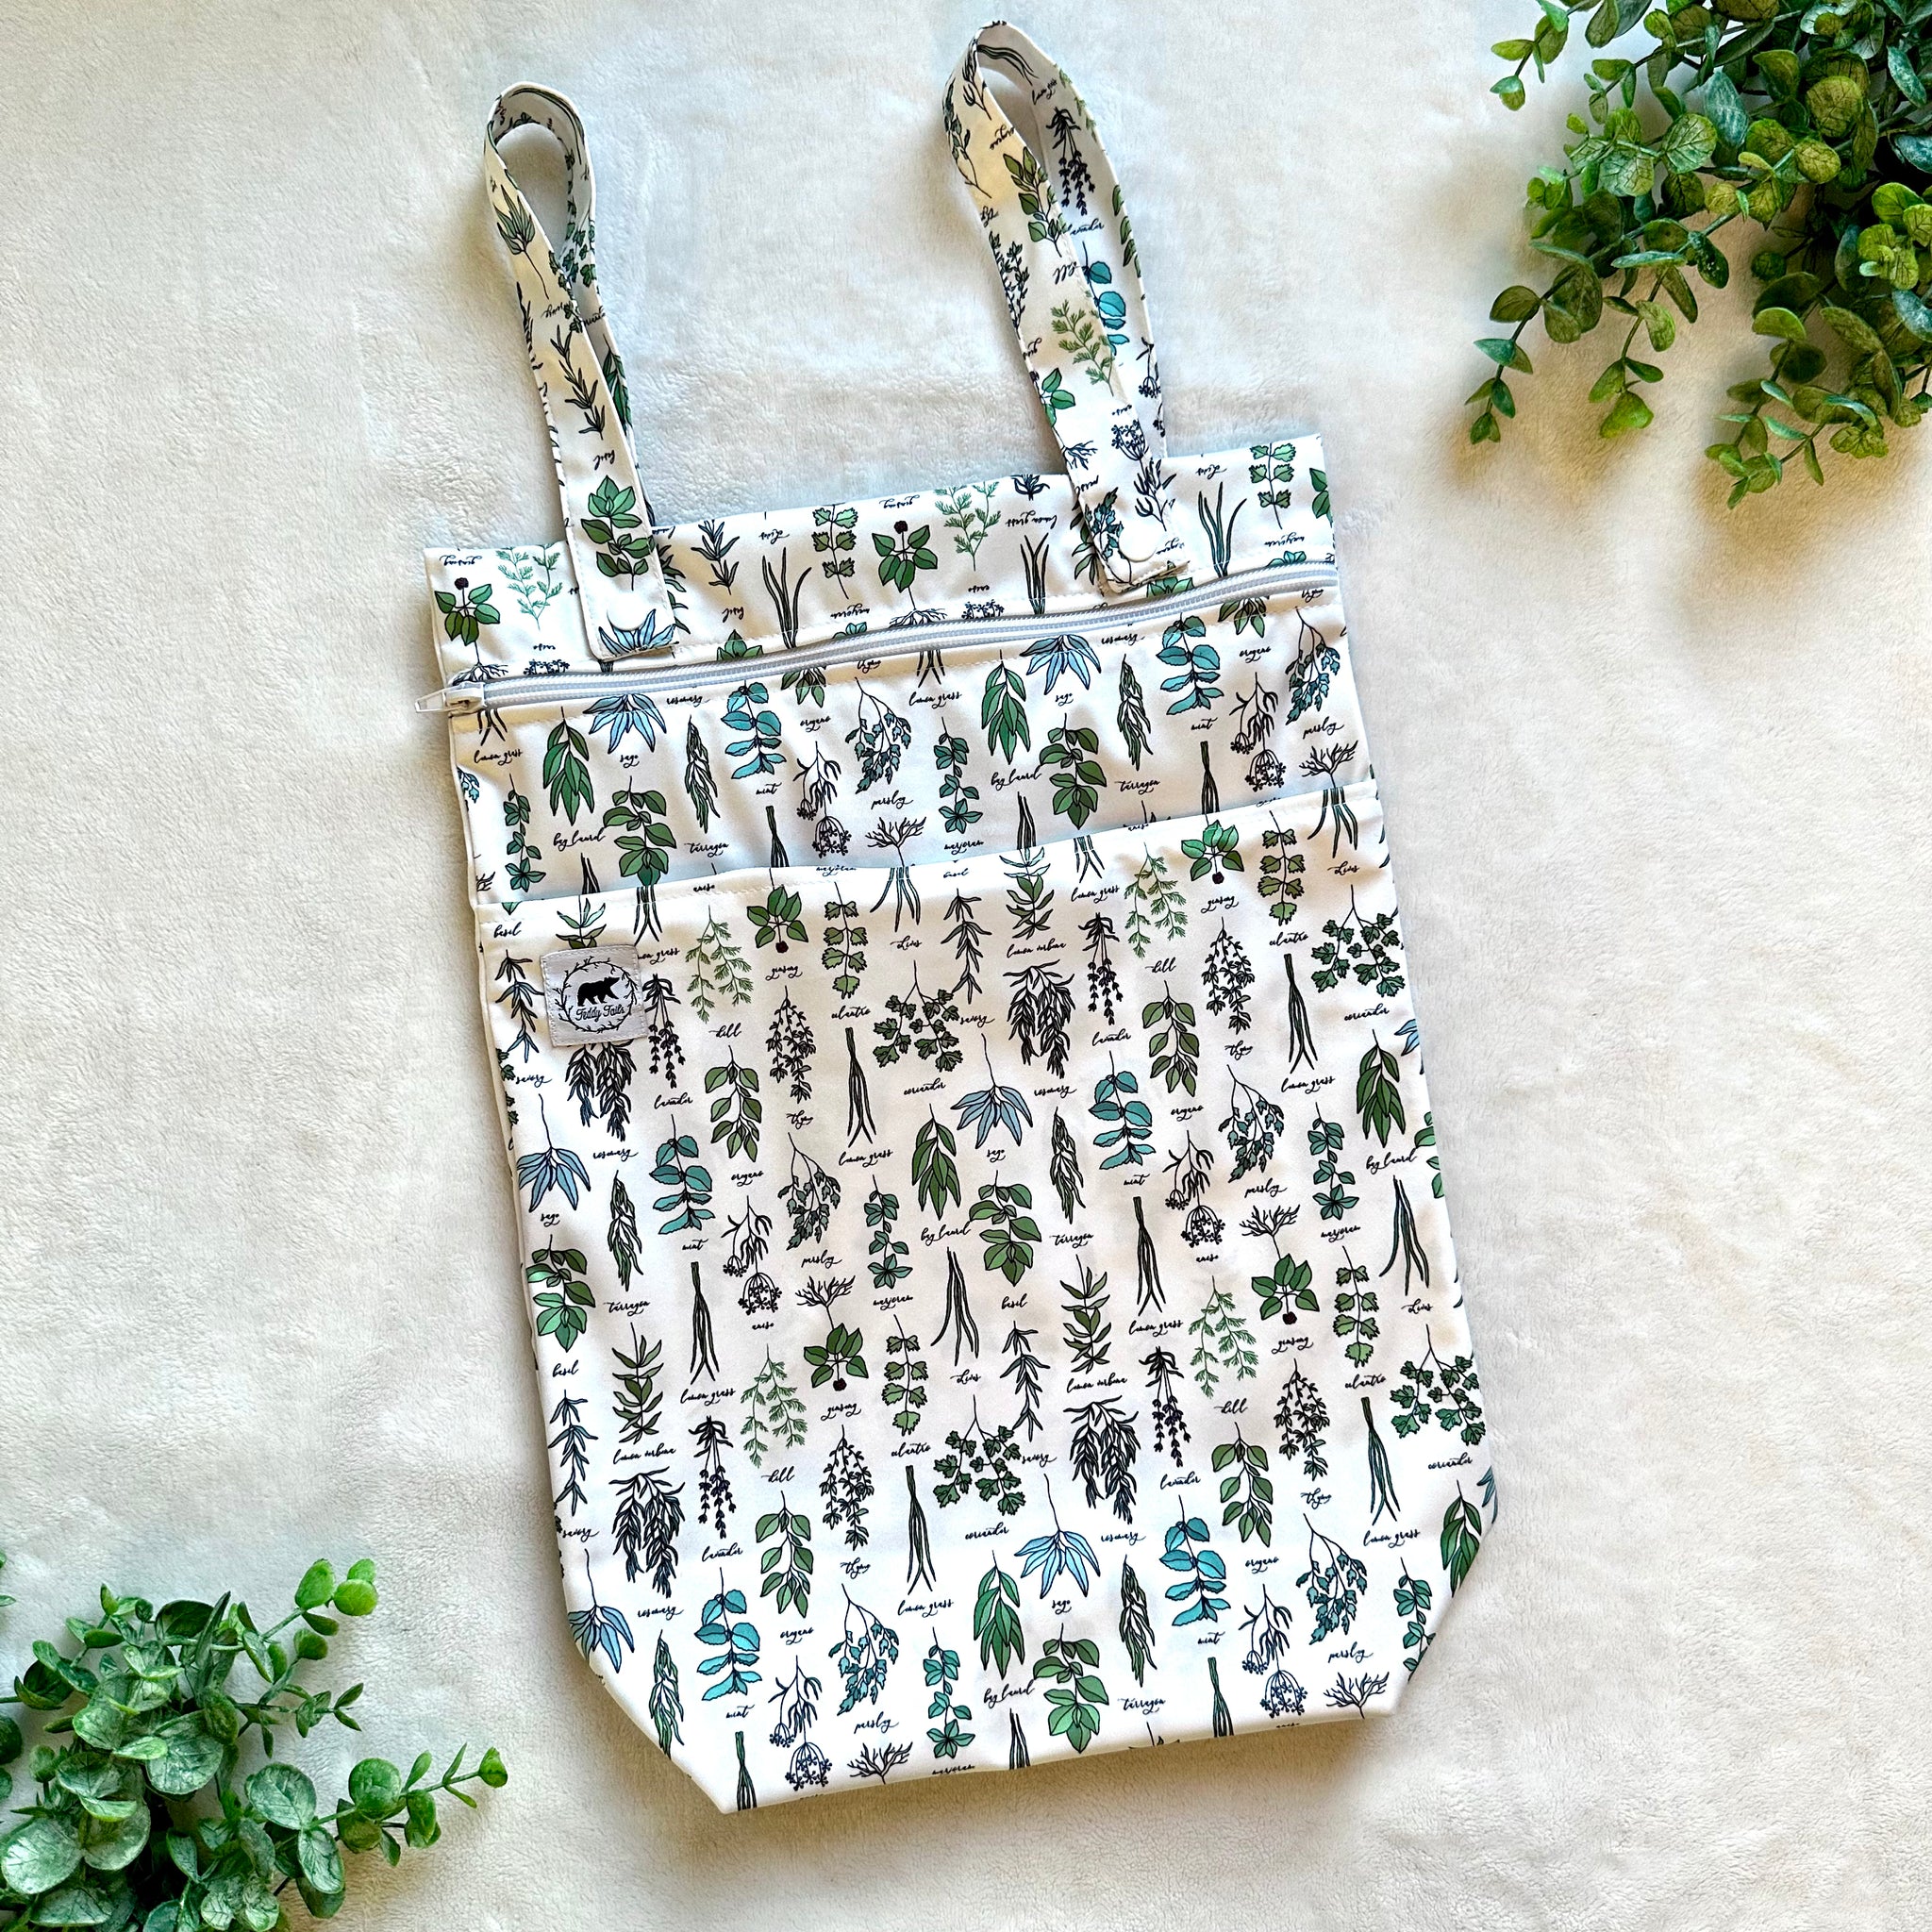 Herbal Apothecary Wet Bag (In Stock)